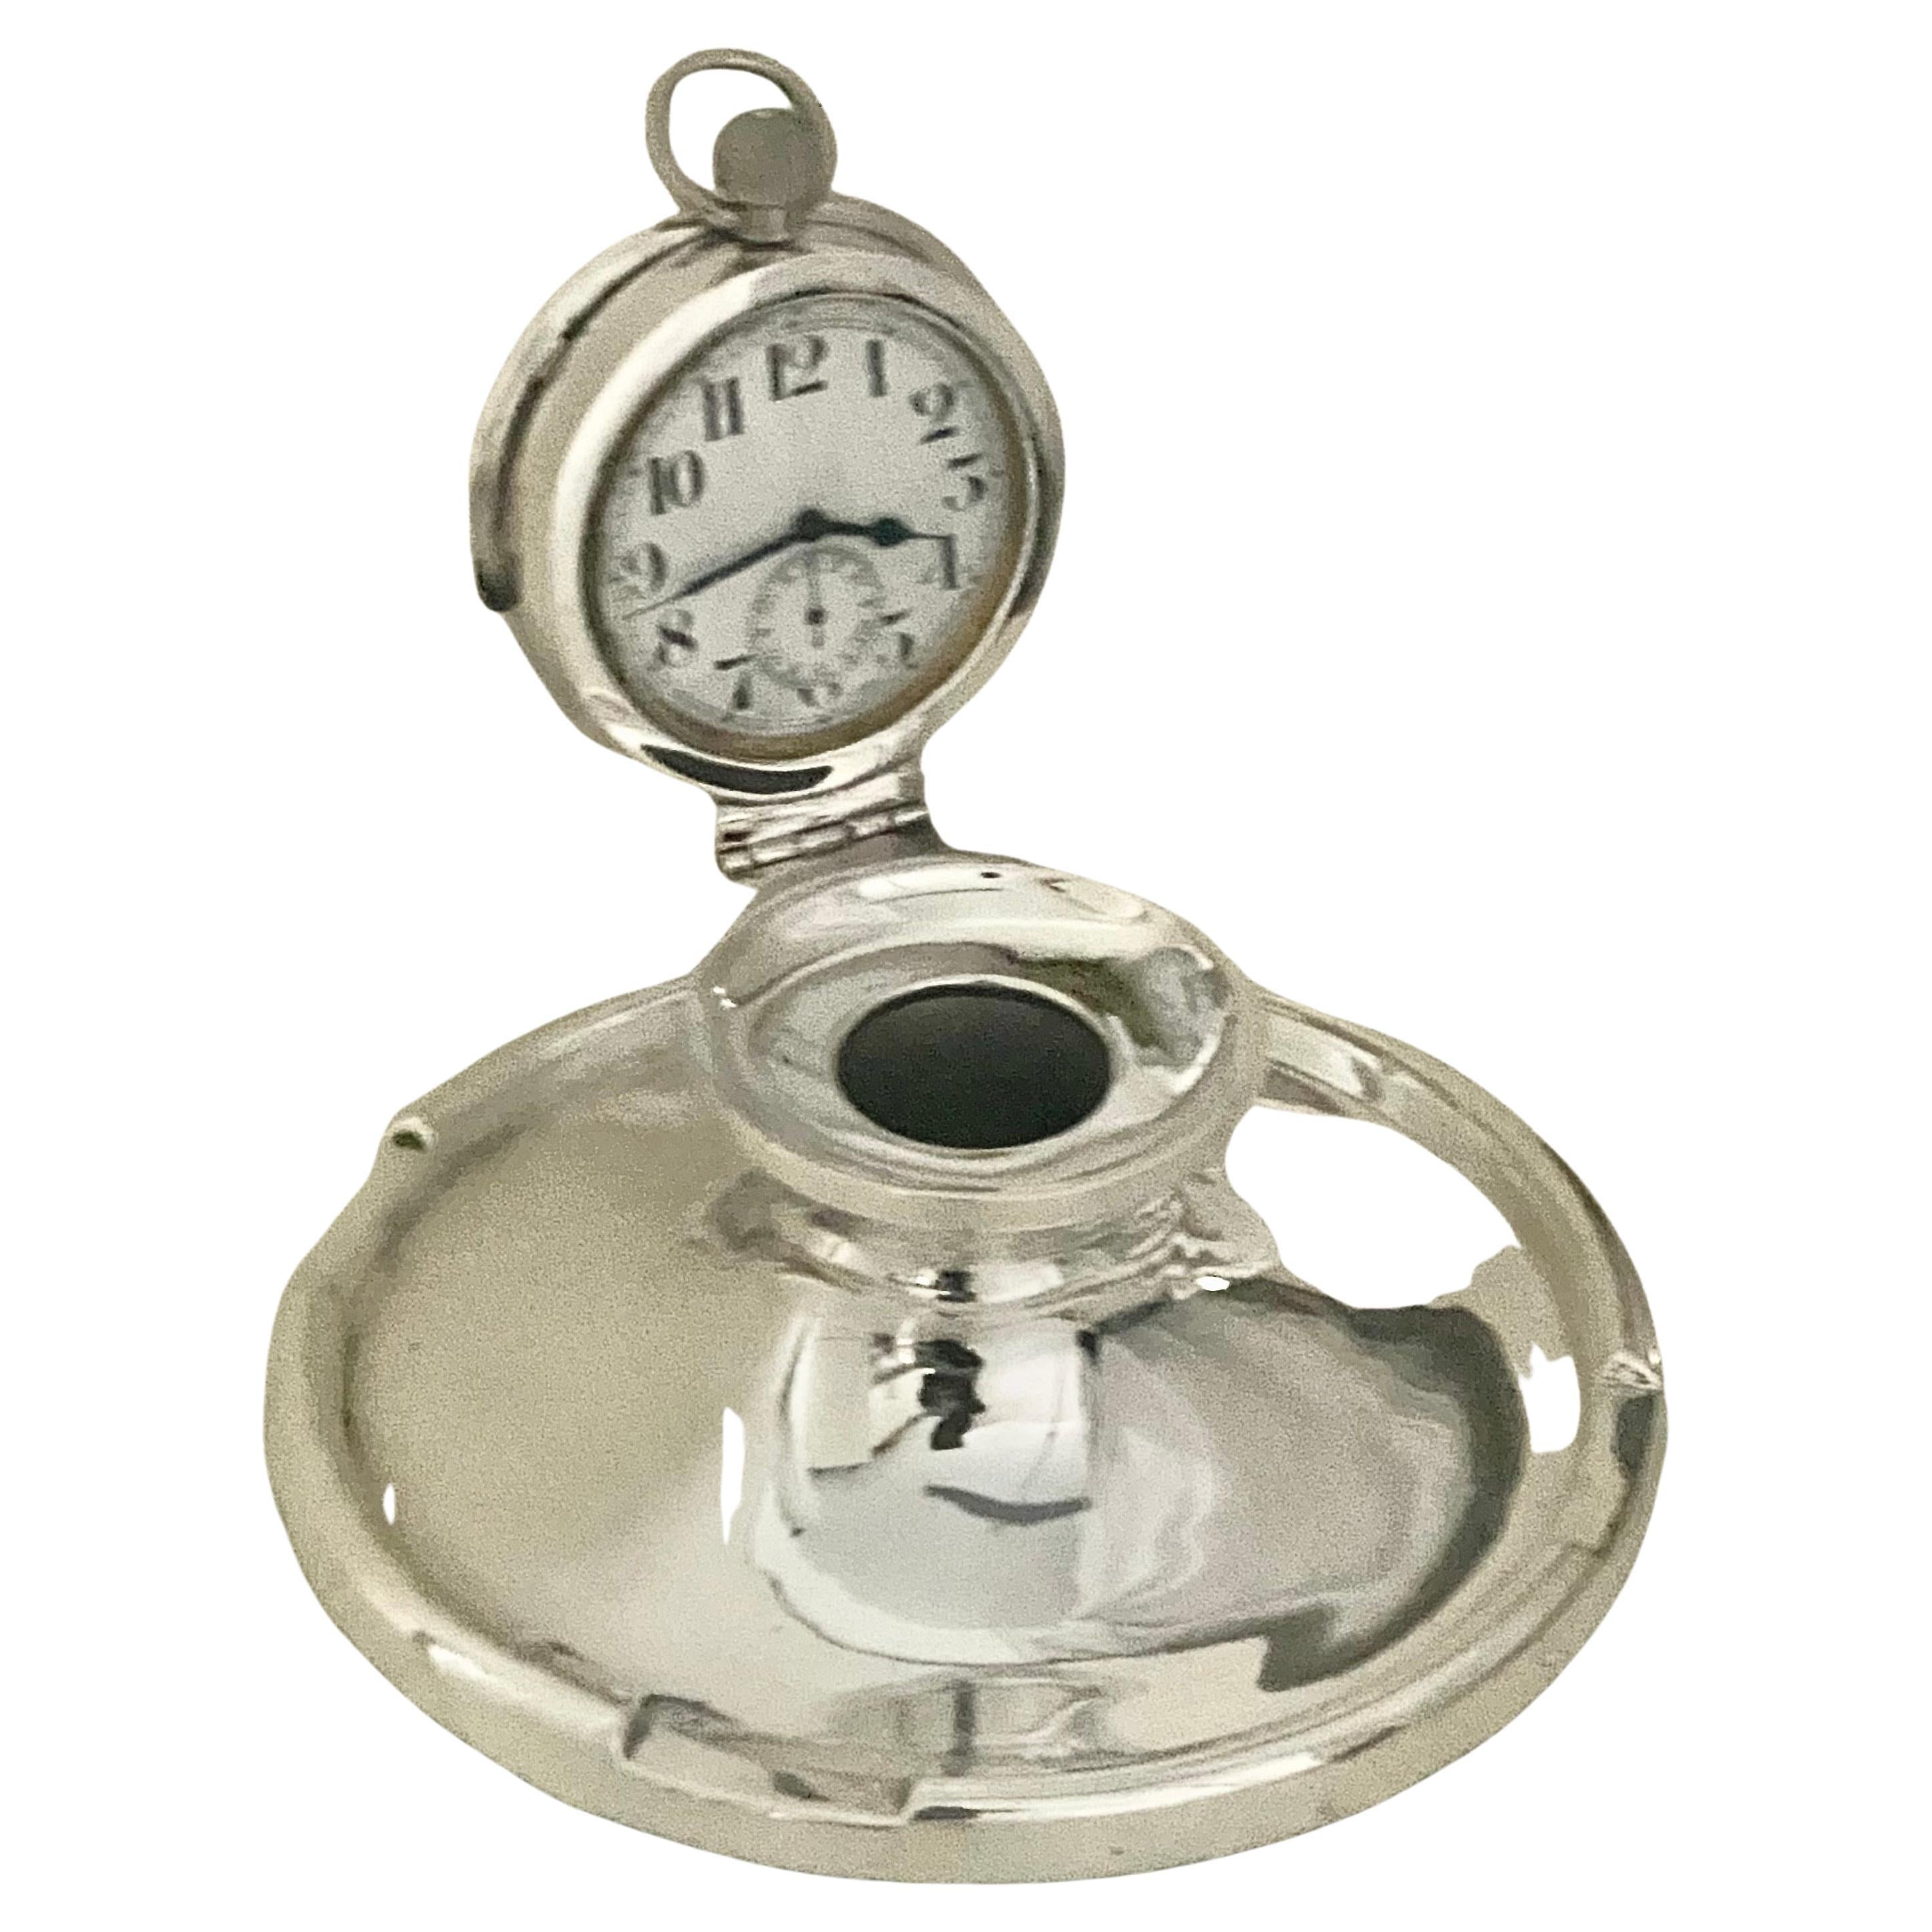 Very highly sought-after, this is a lovely example of an inkwell with the pocket watch lid. Made from sterling silver, the inkwell is hallmarked forBirmingham 1906, Edwardian in era. 
The watch is the original and has been overhauled and cleaned by